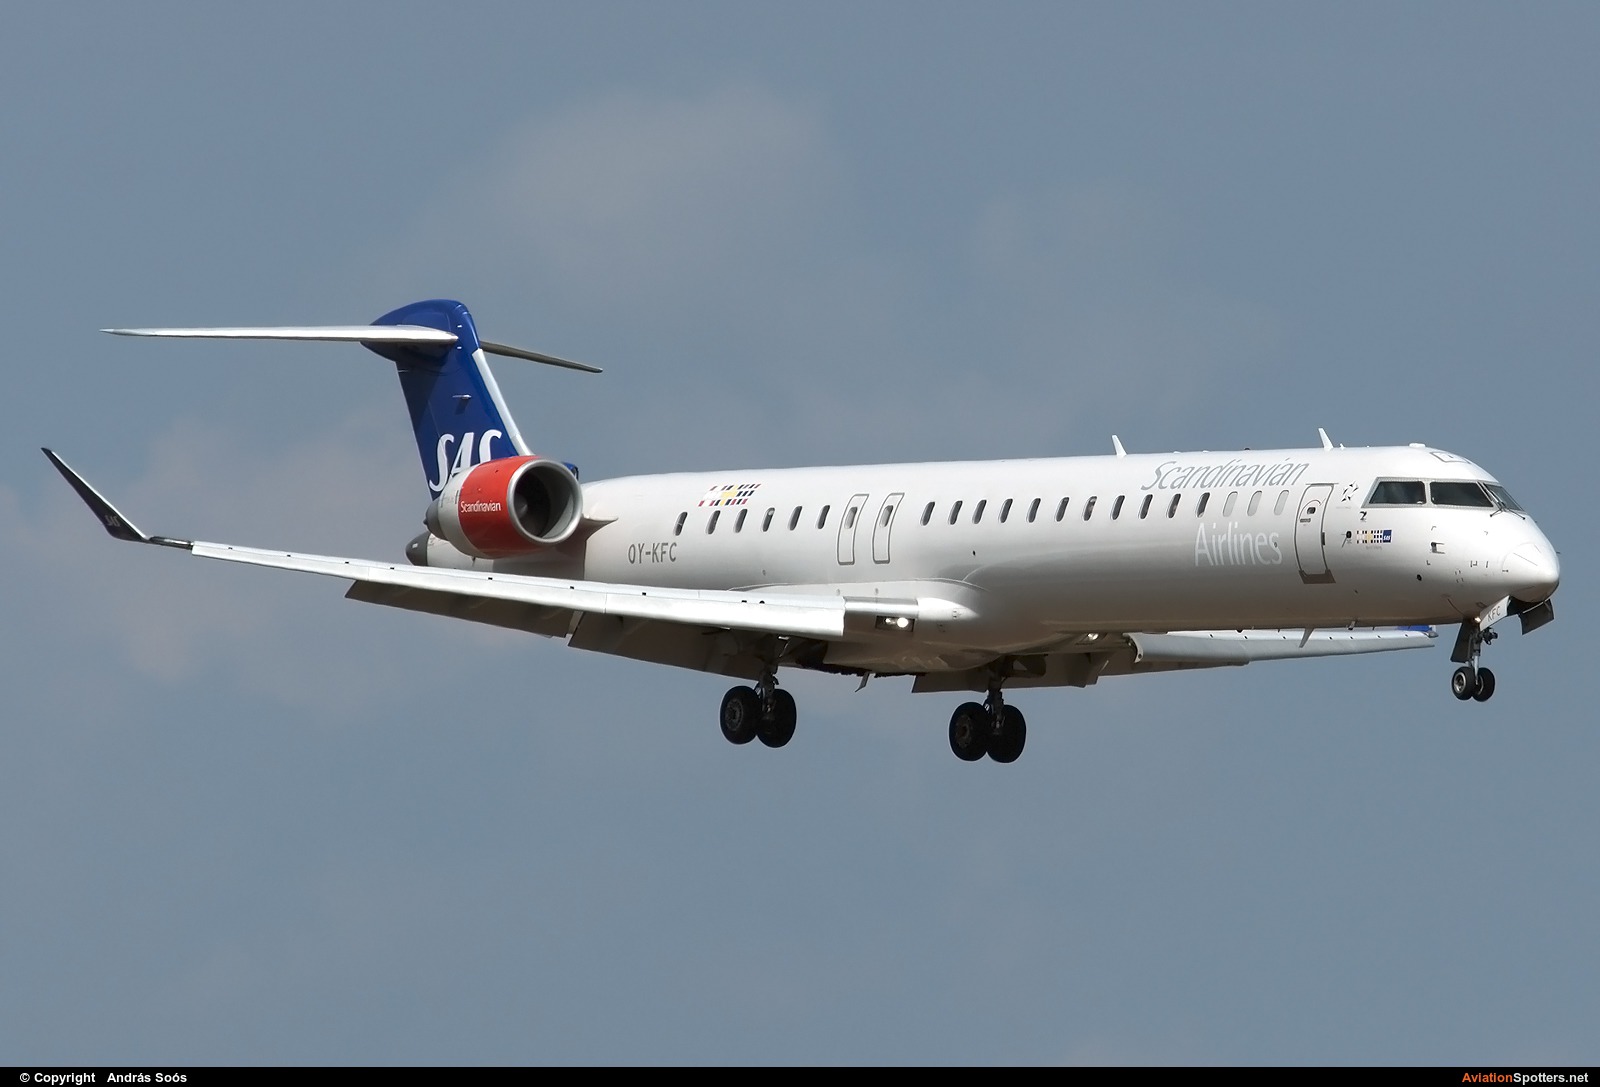 SAS - Scandinavian Airlines  -  CL-600 Challenger 600  (OY-KFC) By András Soós (sas1965)